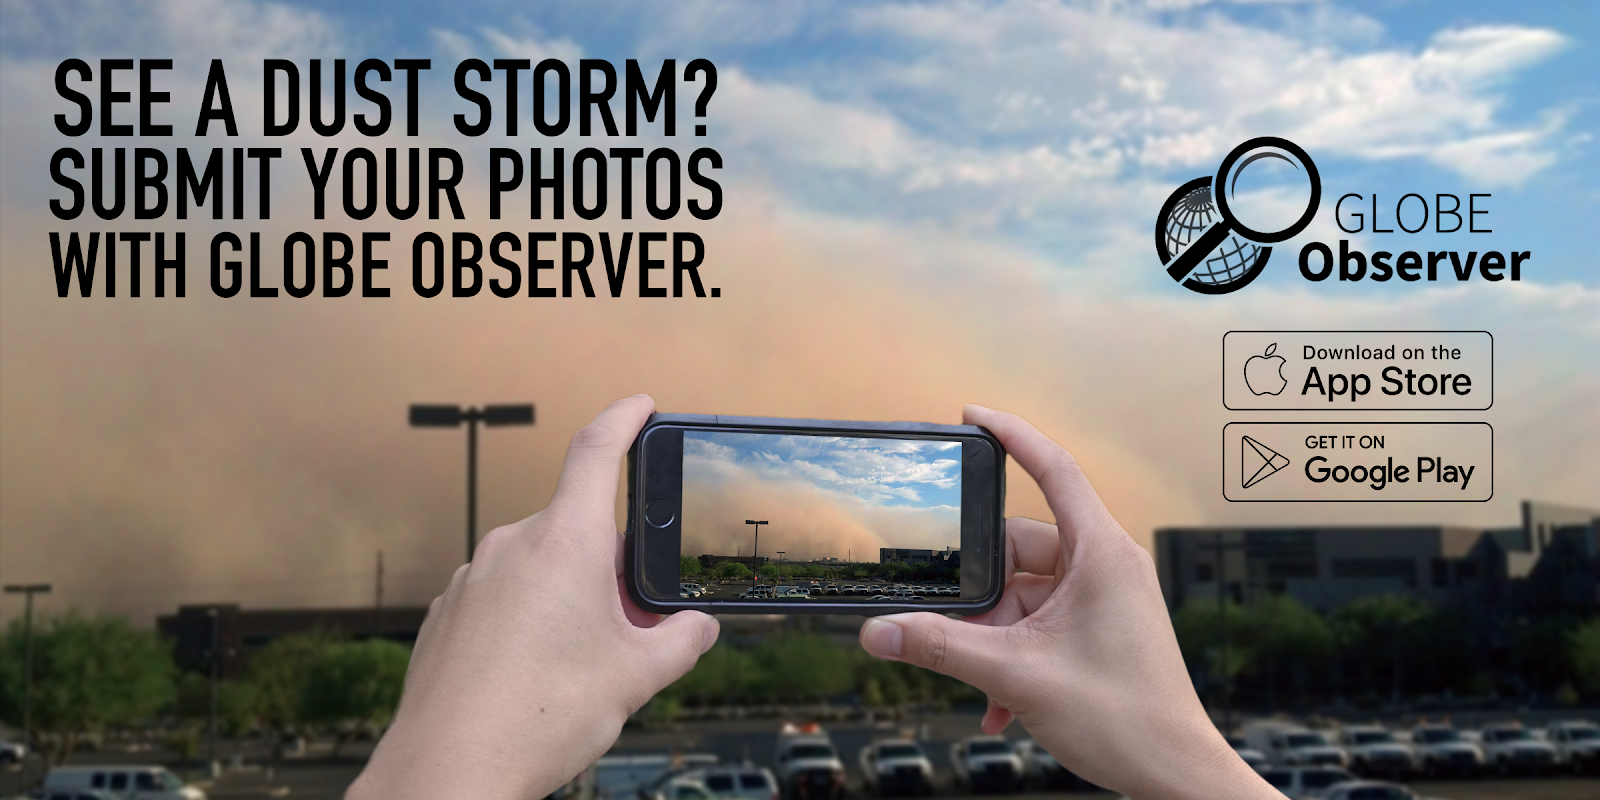 Graphic for "See a Dust Storm? Submit Your Photos with GLOBE Observer"